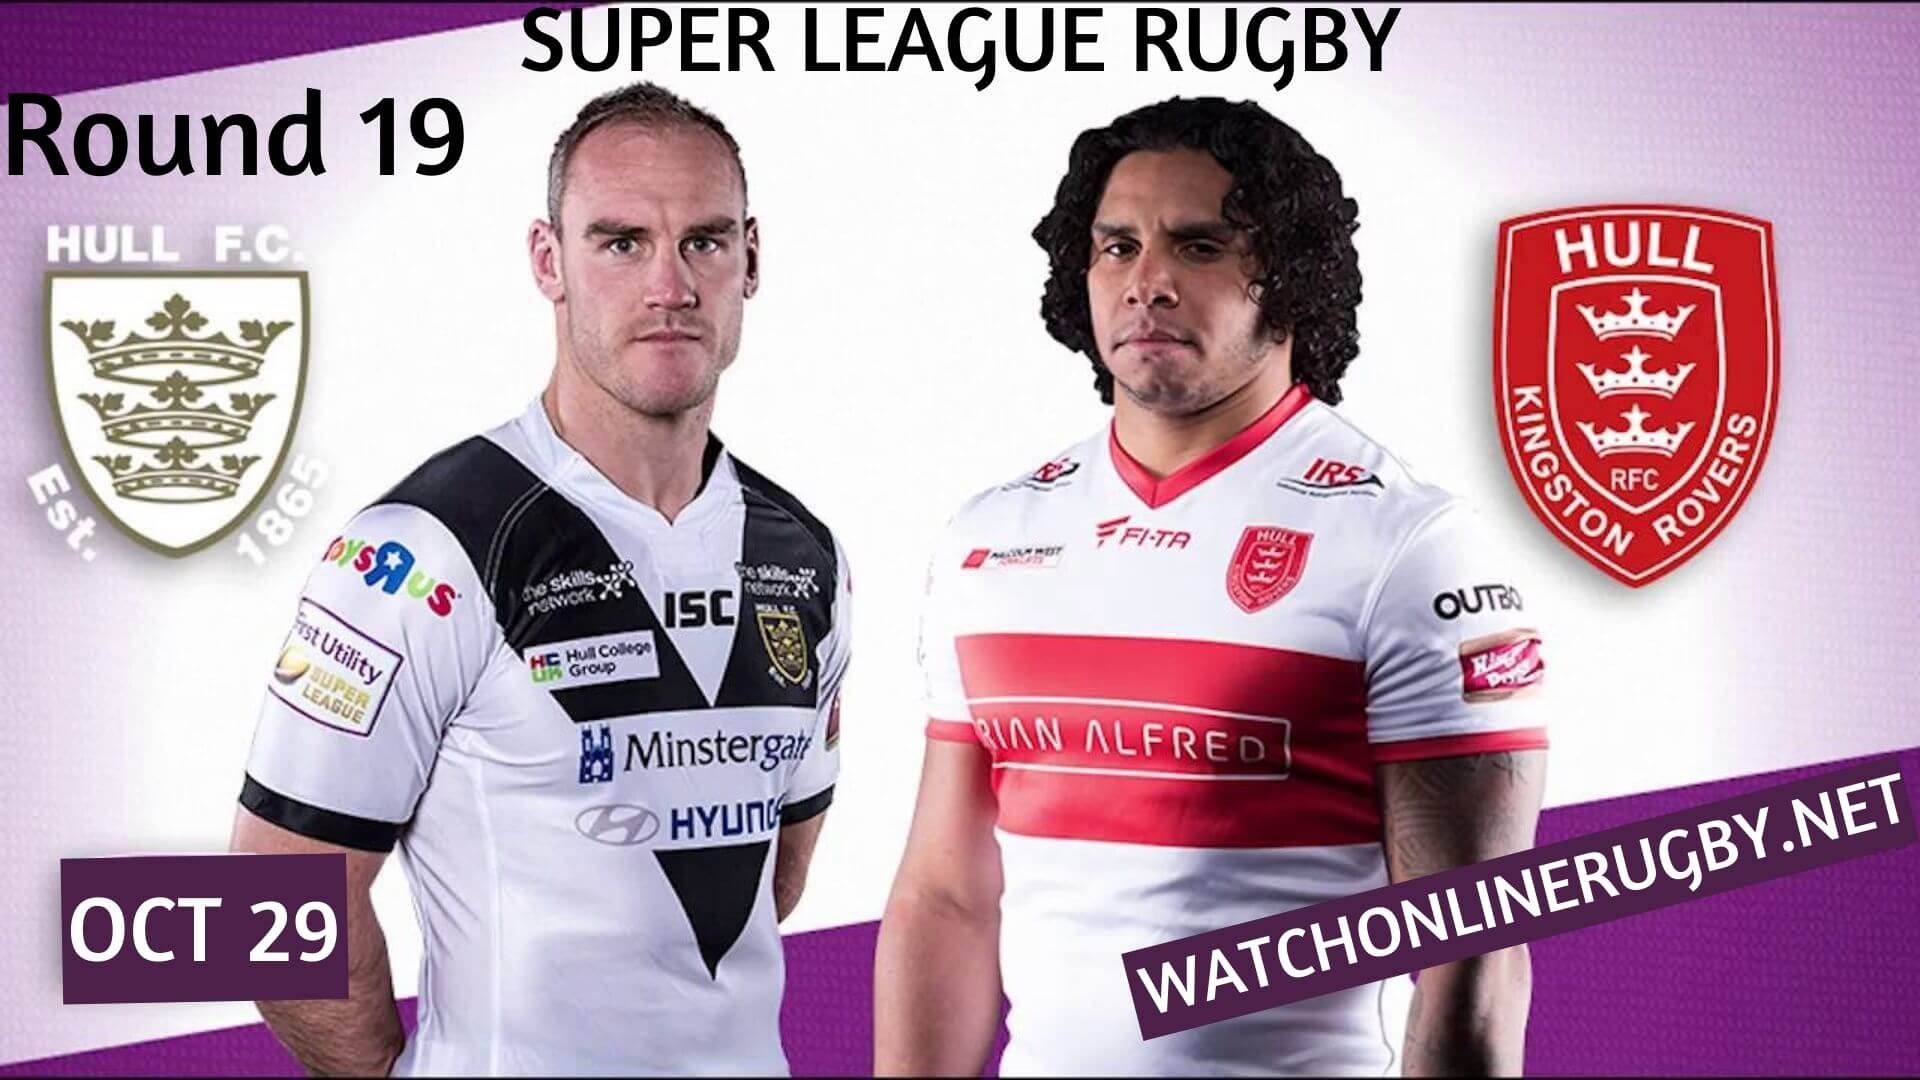 Hull Kingston Rovers Vs Hull Fc Super League Rugby 2020 RD 19